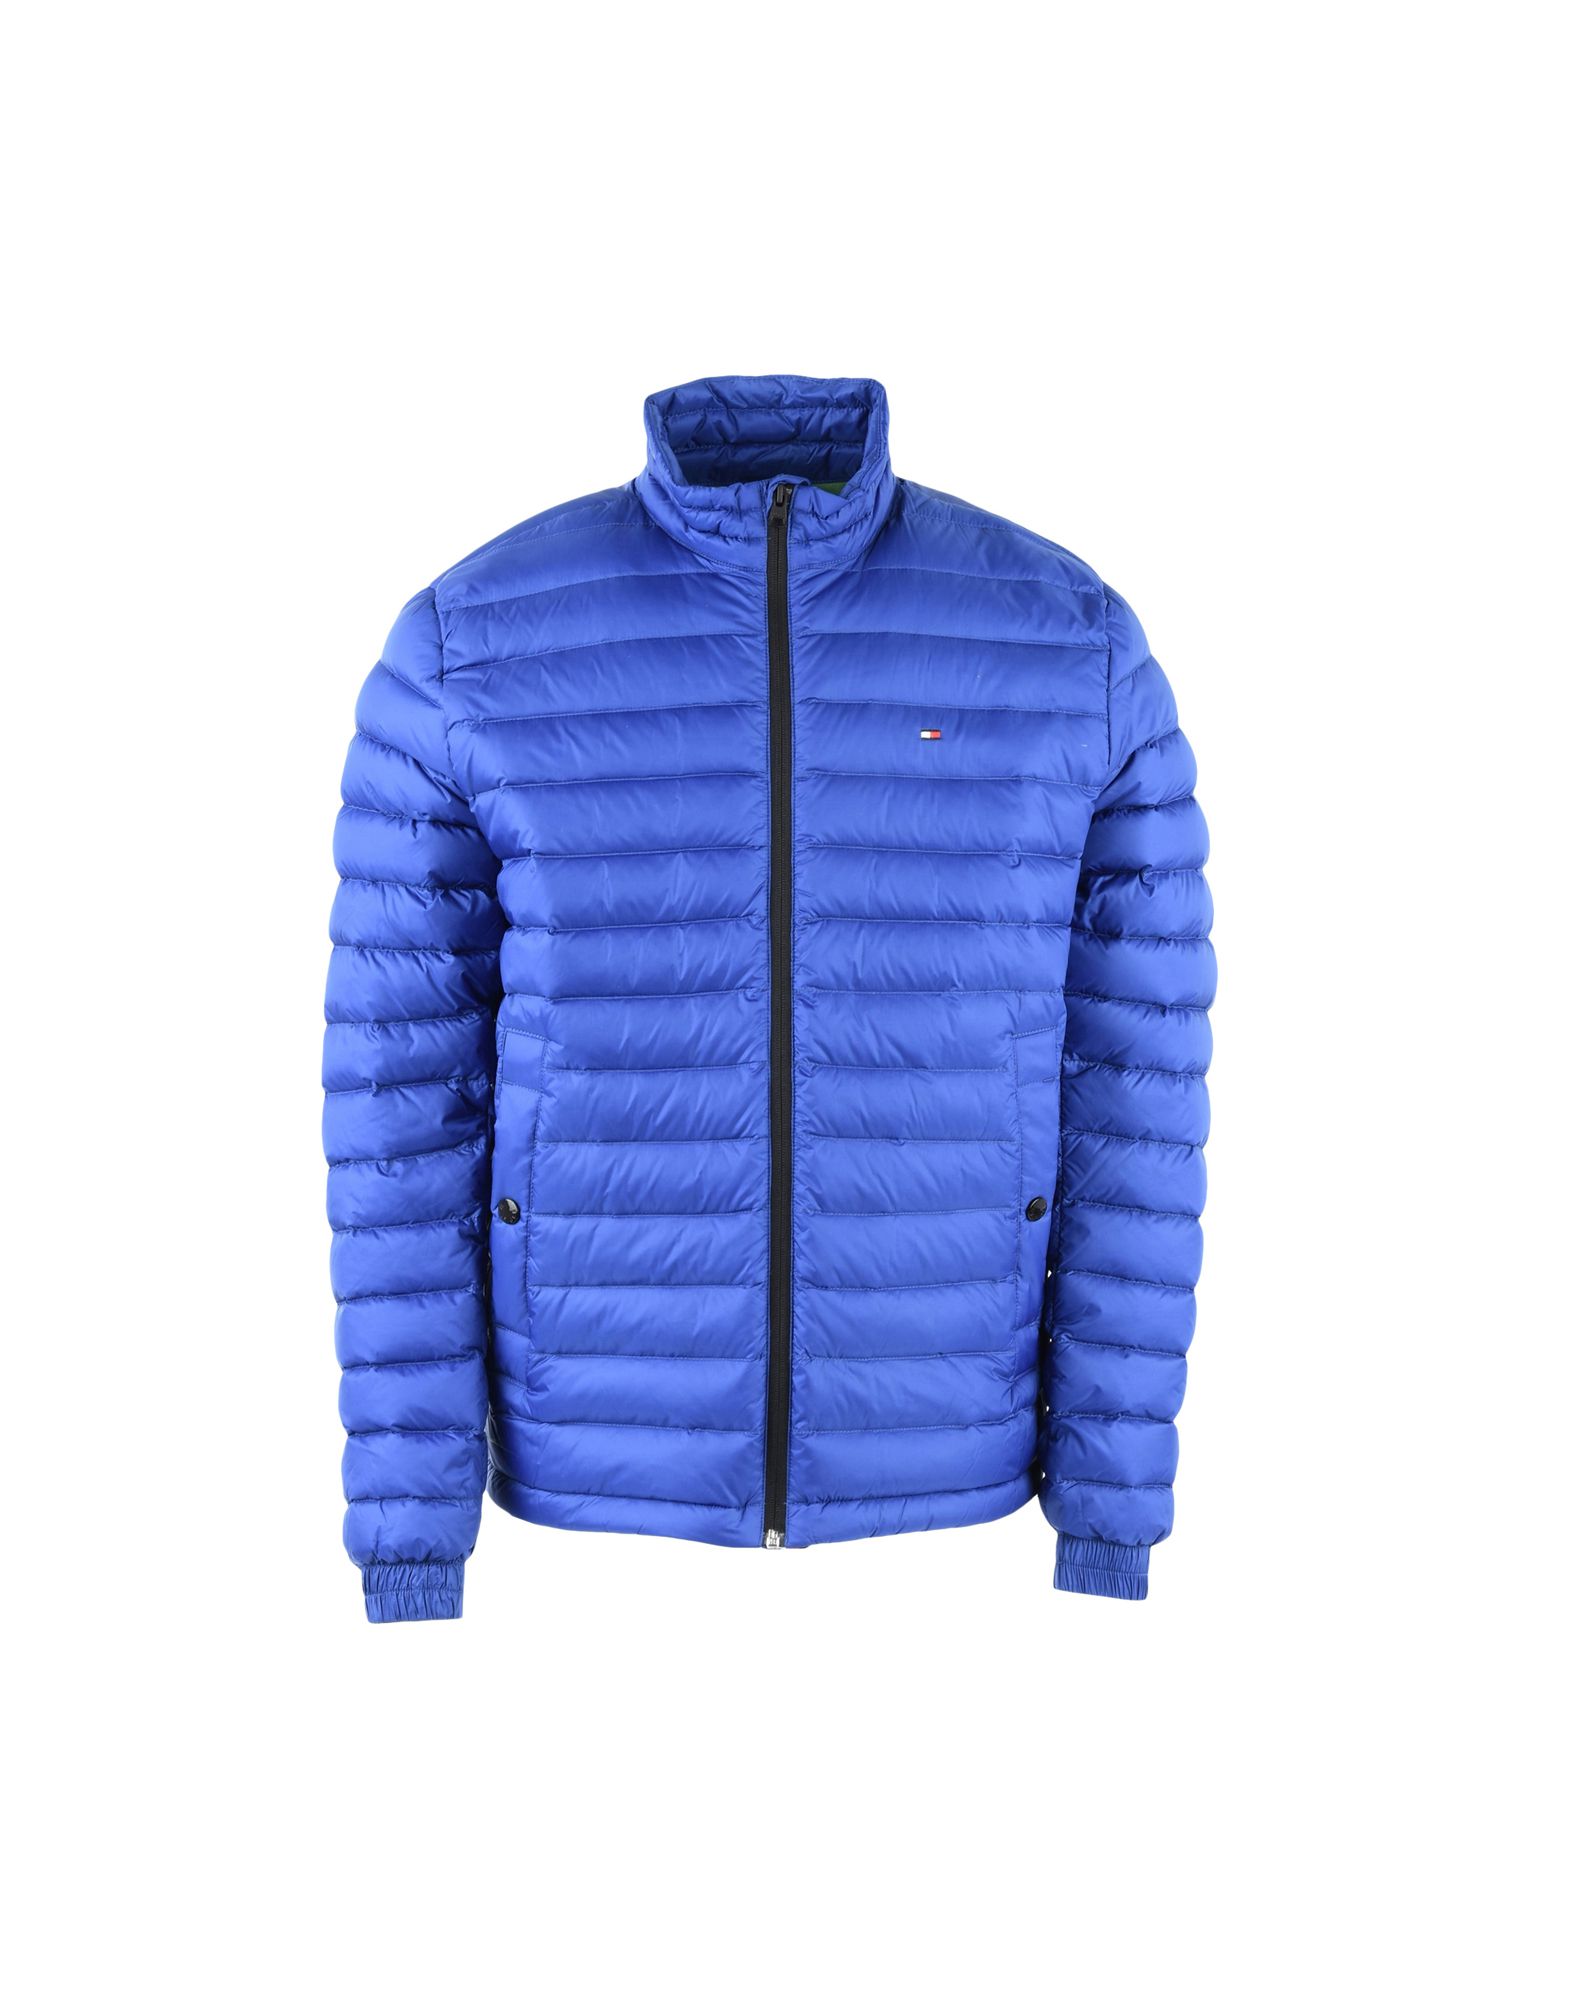 TOMMY HILFIGER LW PACKABLE DOWN BOMBER jacket Blue men Coats and Jackets,tommy  hilfiger factory